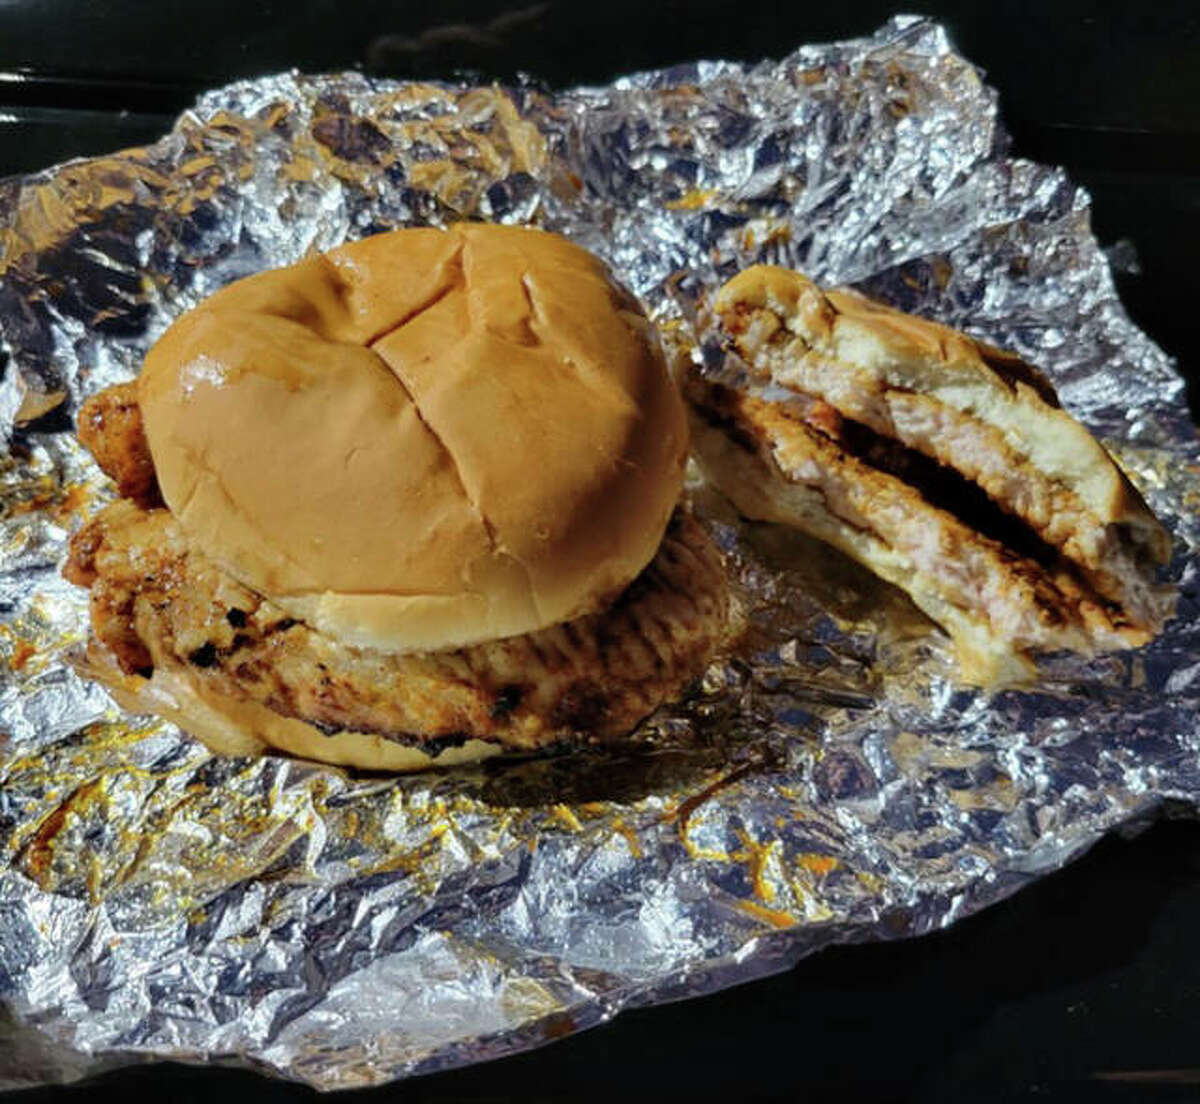 The pork chop sandwiches served at the Carlinville High School concession stand during football games have been named among the top four in Illinois. Online voting is Nov. 1-5, with the winning school receiving an IHSA banner, a cash prize and the “Golden Spatula.”